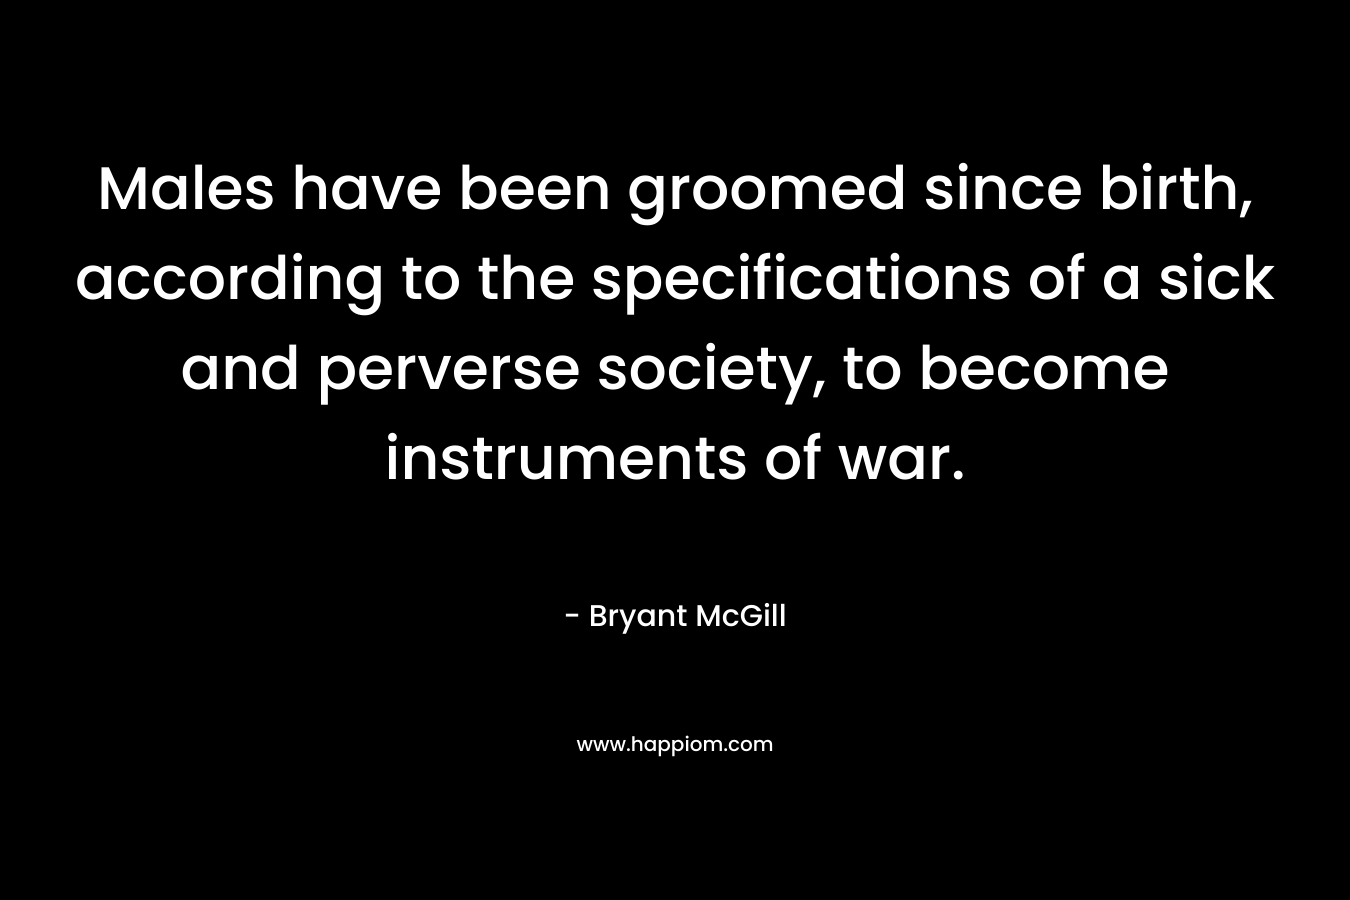 Males have been groomed since birth, according to the specifications of a sick and perverse society, to become instruments of war. – Bryant McGill